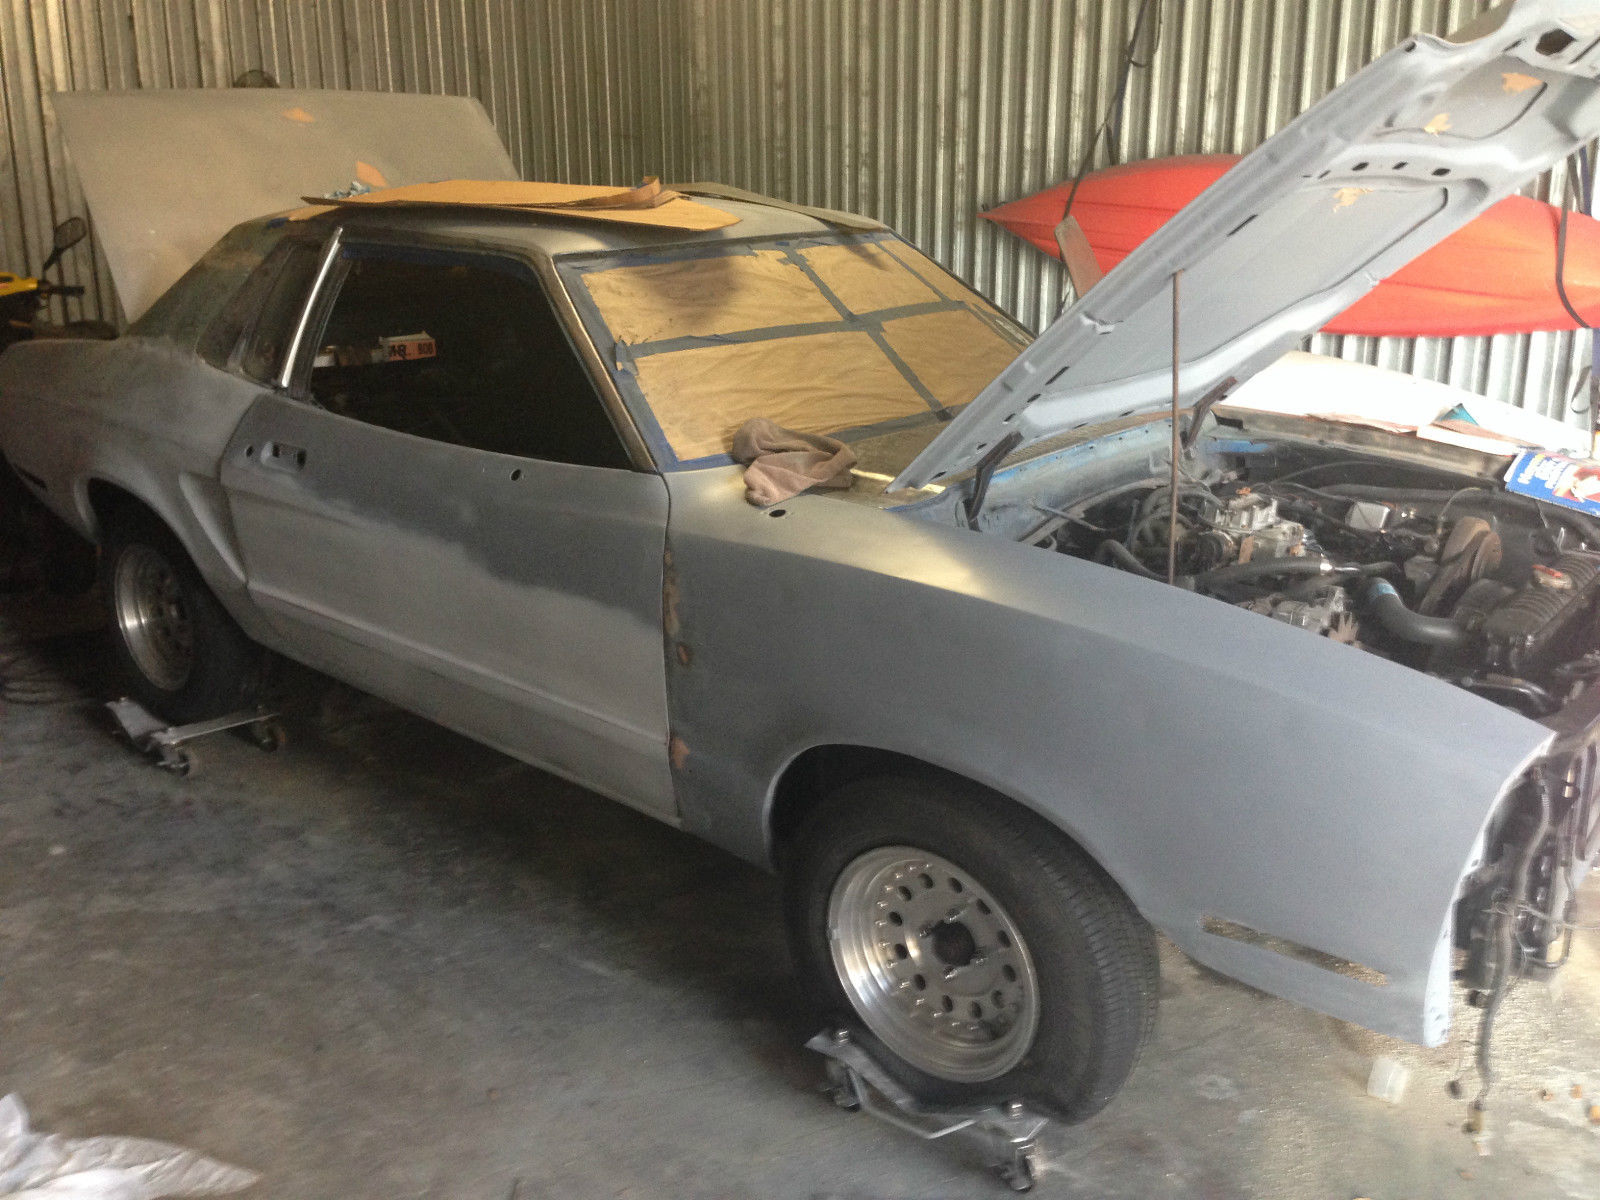 1978 Ford Mustang Ghia For Sale